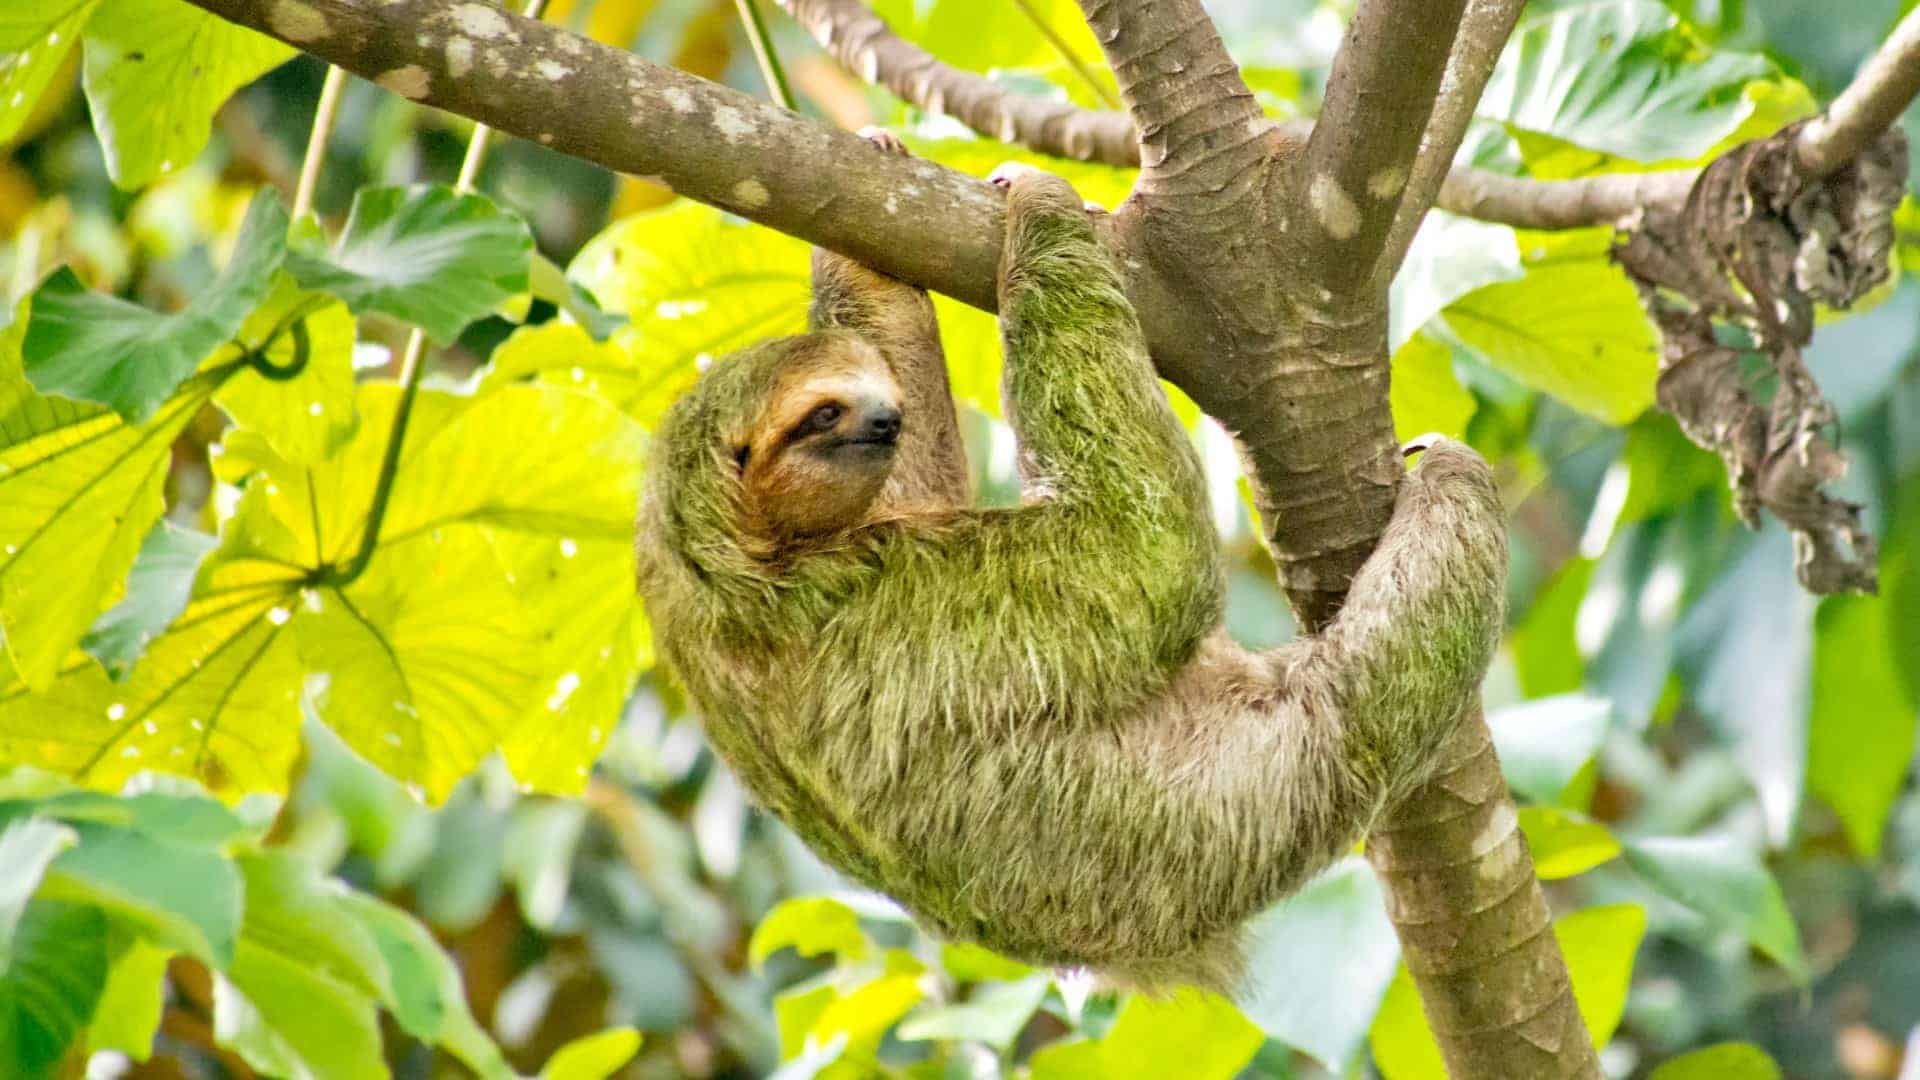 A sloth hanging from a tree branch surrounded by lush green foliage in a tropical forest. The sloth has a relaxed expression, and its fur blends with the green leaves, indicating a well-camouflaged presence in its natural habitat.